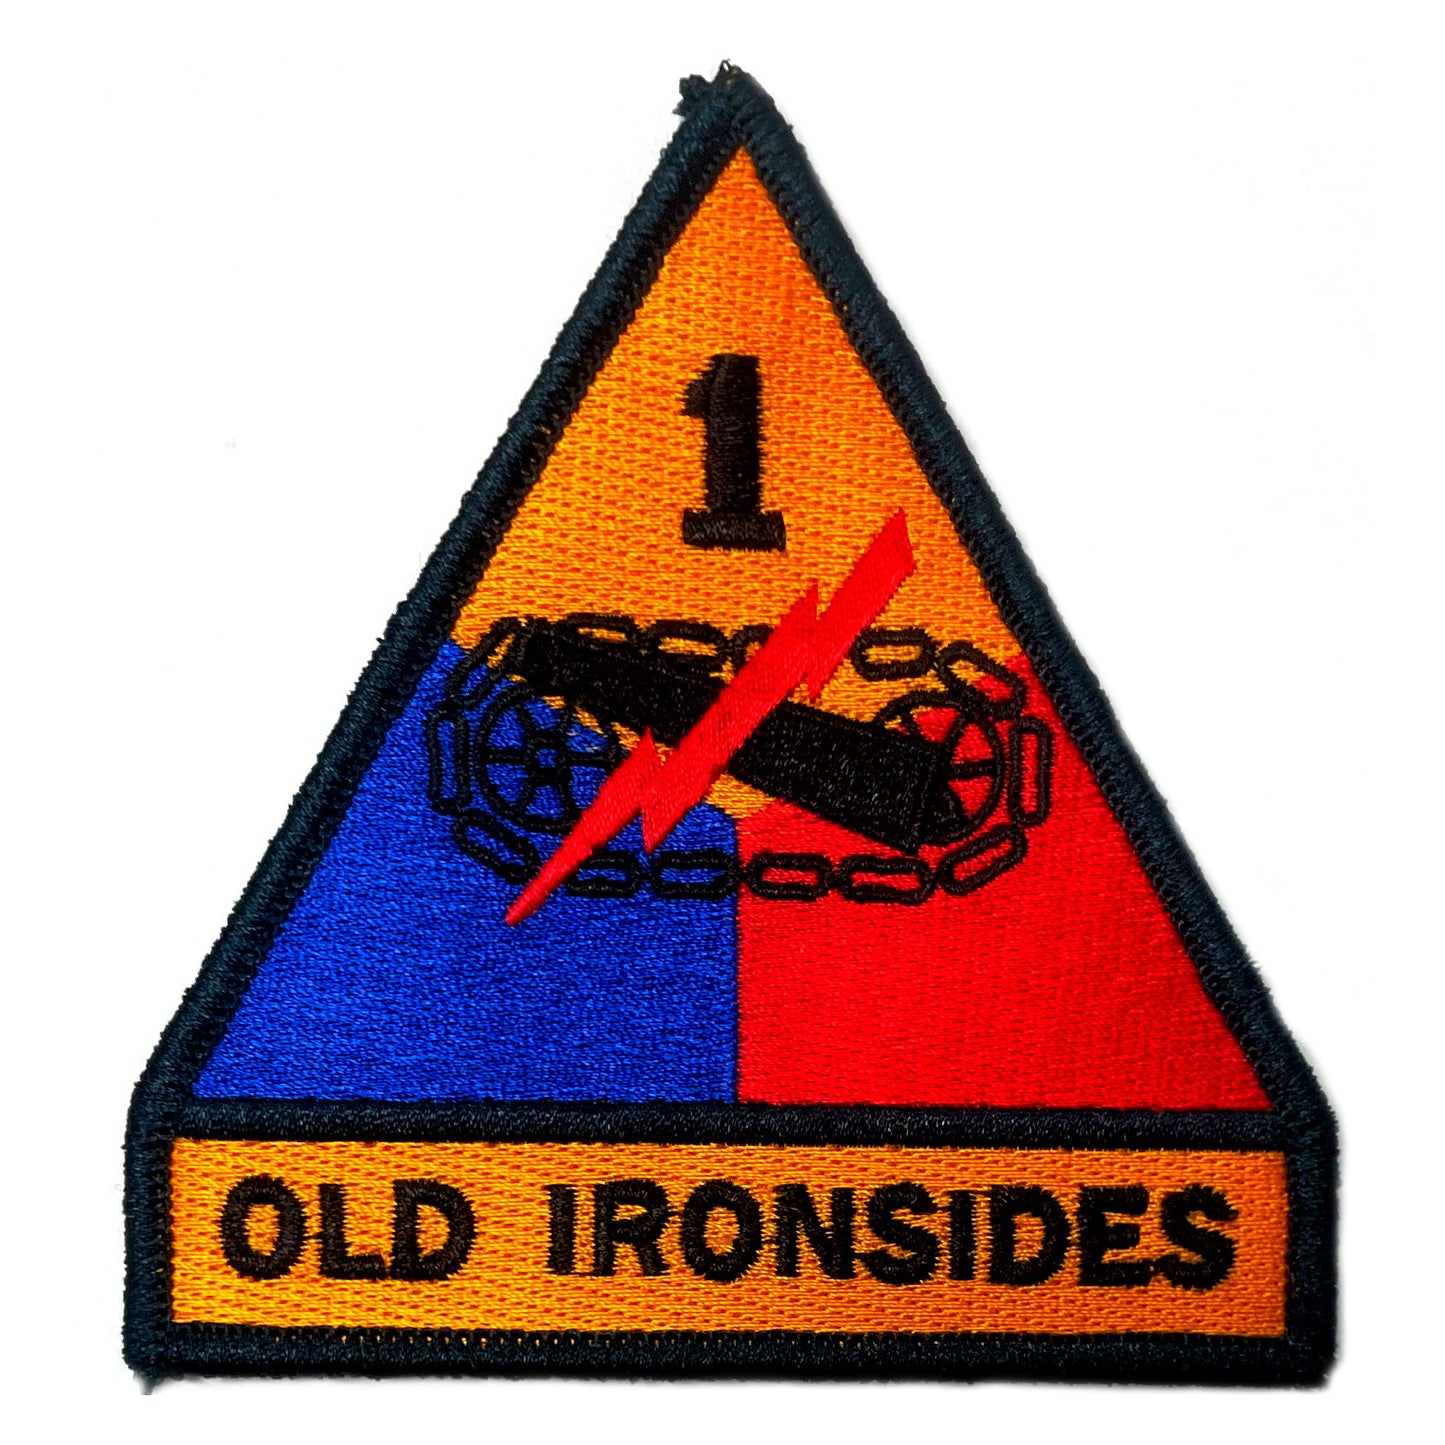 U.S. Army 1st Armored Division (Old Ironsides) Color Patch with Hook Fastener (each).